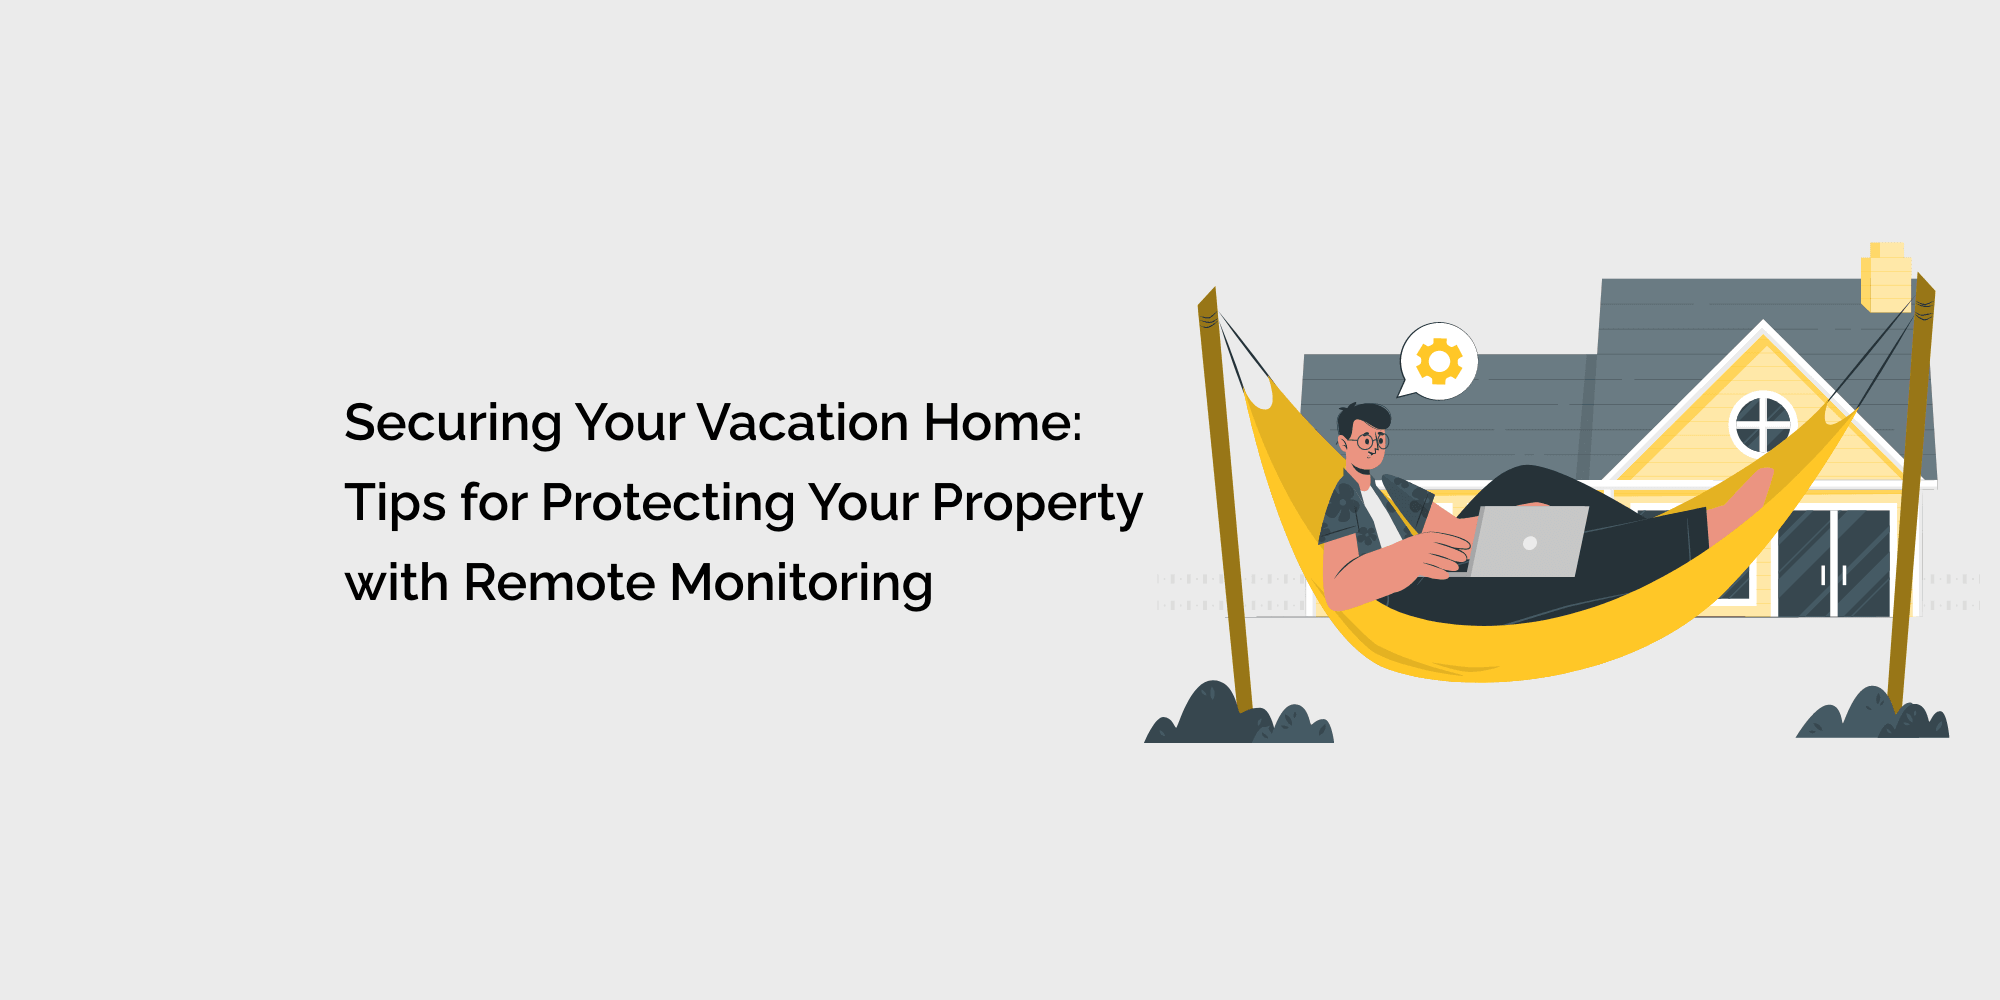 Securing Your Vacation Home: Tips for Protecting Your Property with Remote Monitoring